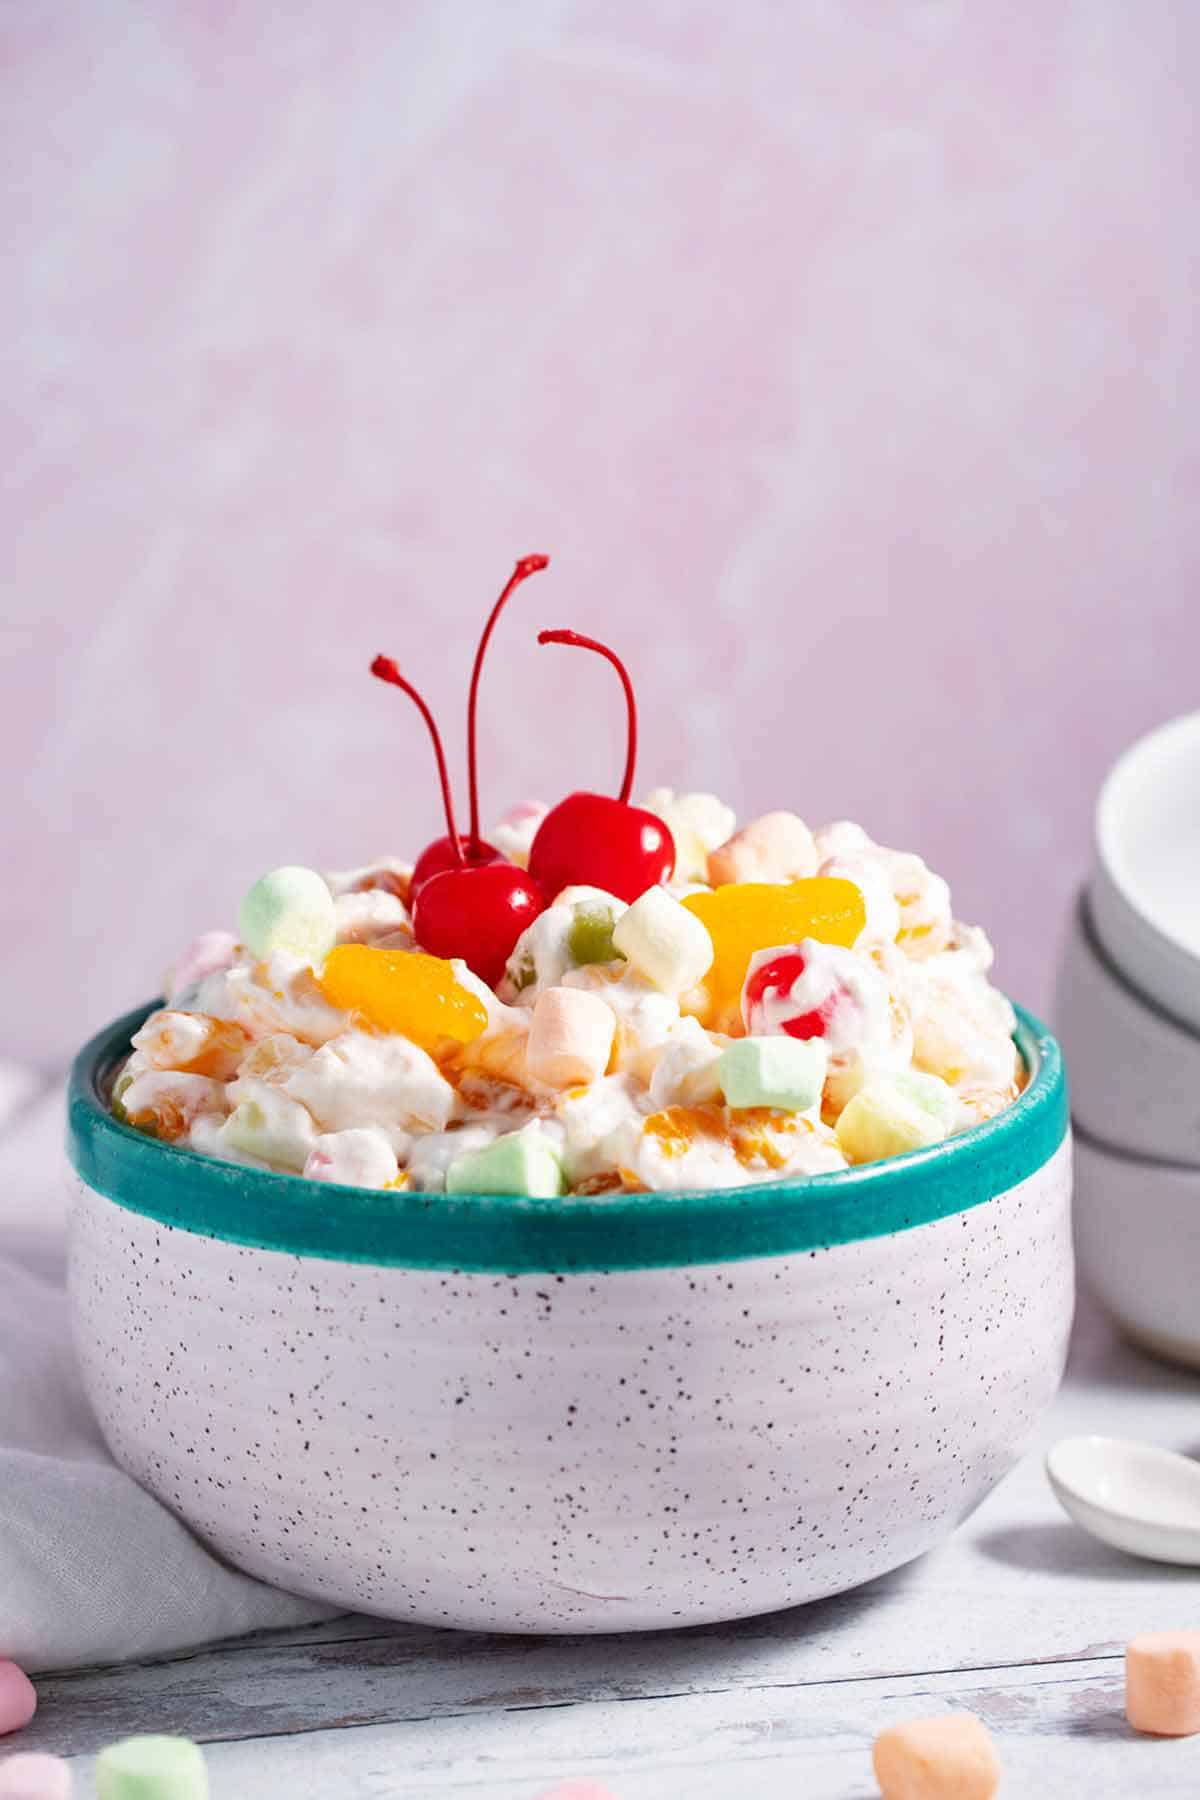 Ambrosia salad with Cool Whip and cherries on top.